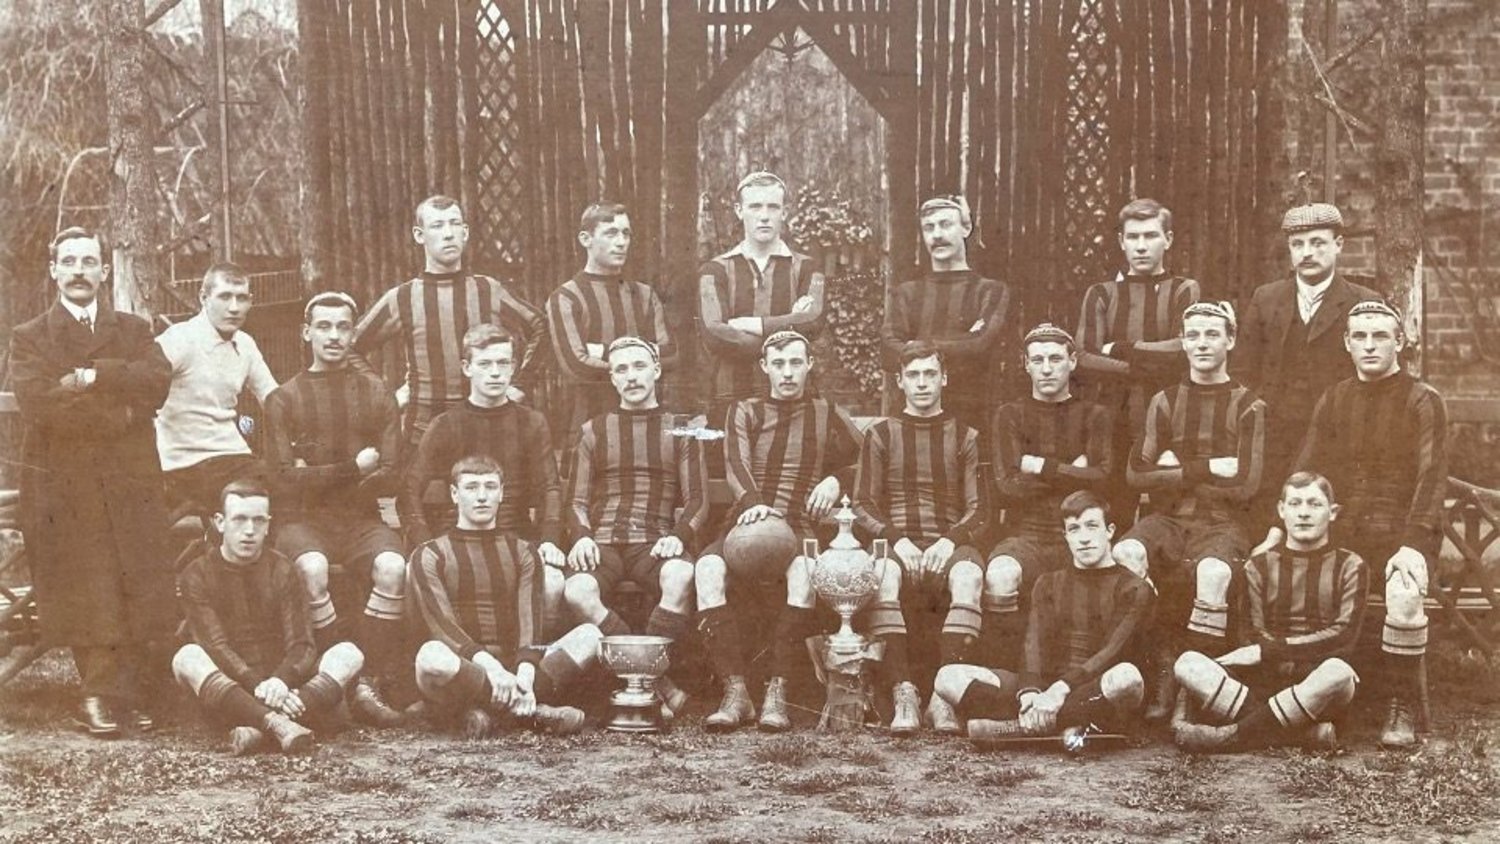 Frank Anderson can be seen in Northampton’s A team photos from the early 1900s.